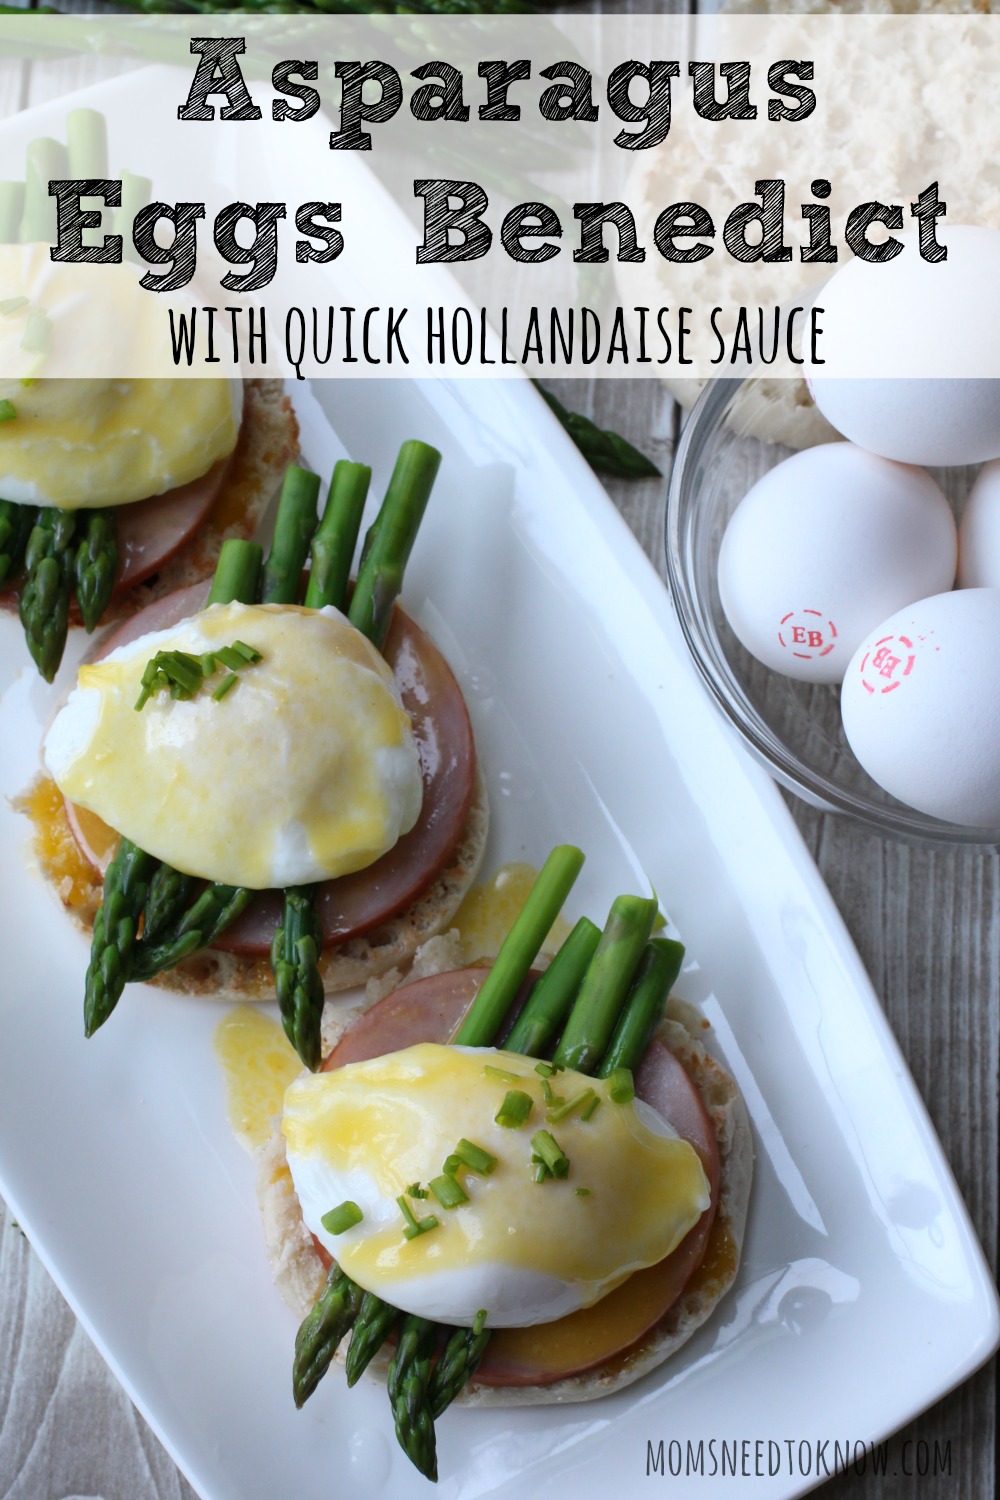 Eggs Benedict with Easy Homemade Hollandaise Sauce